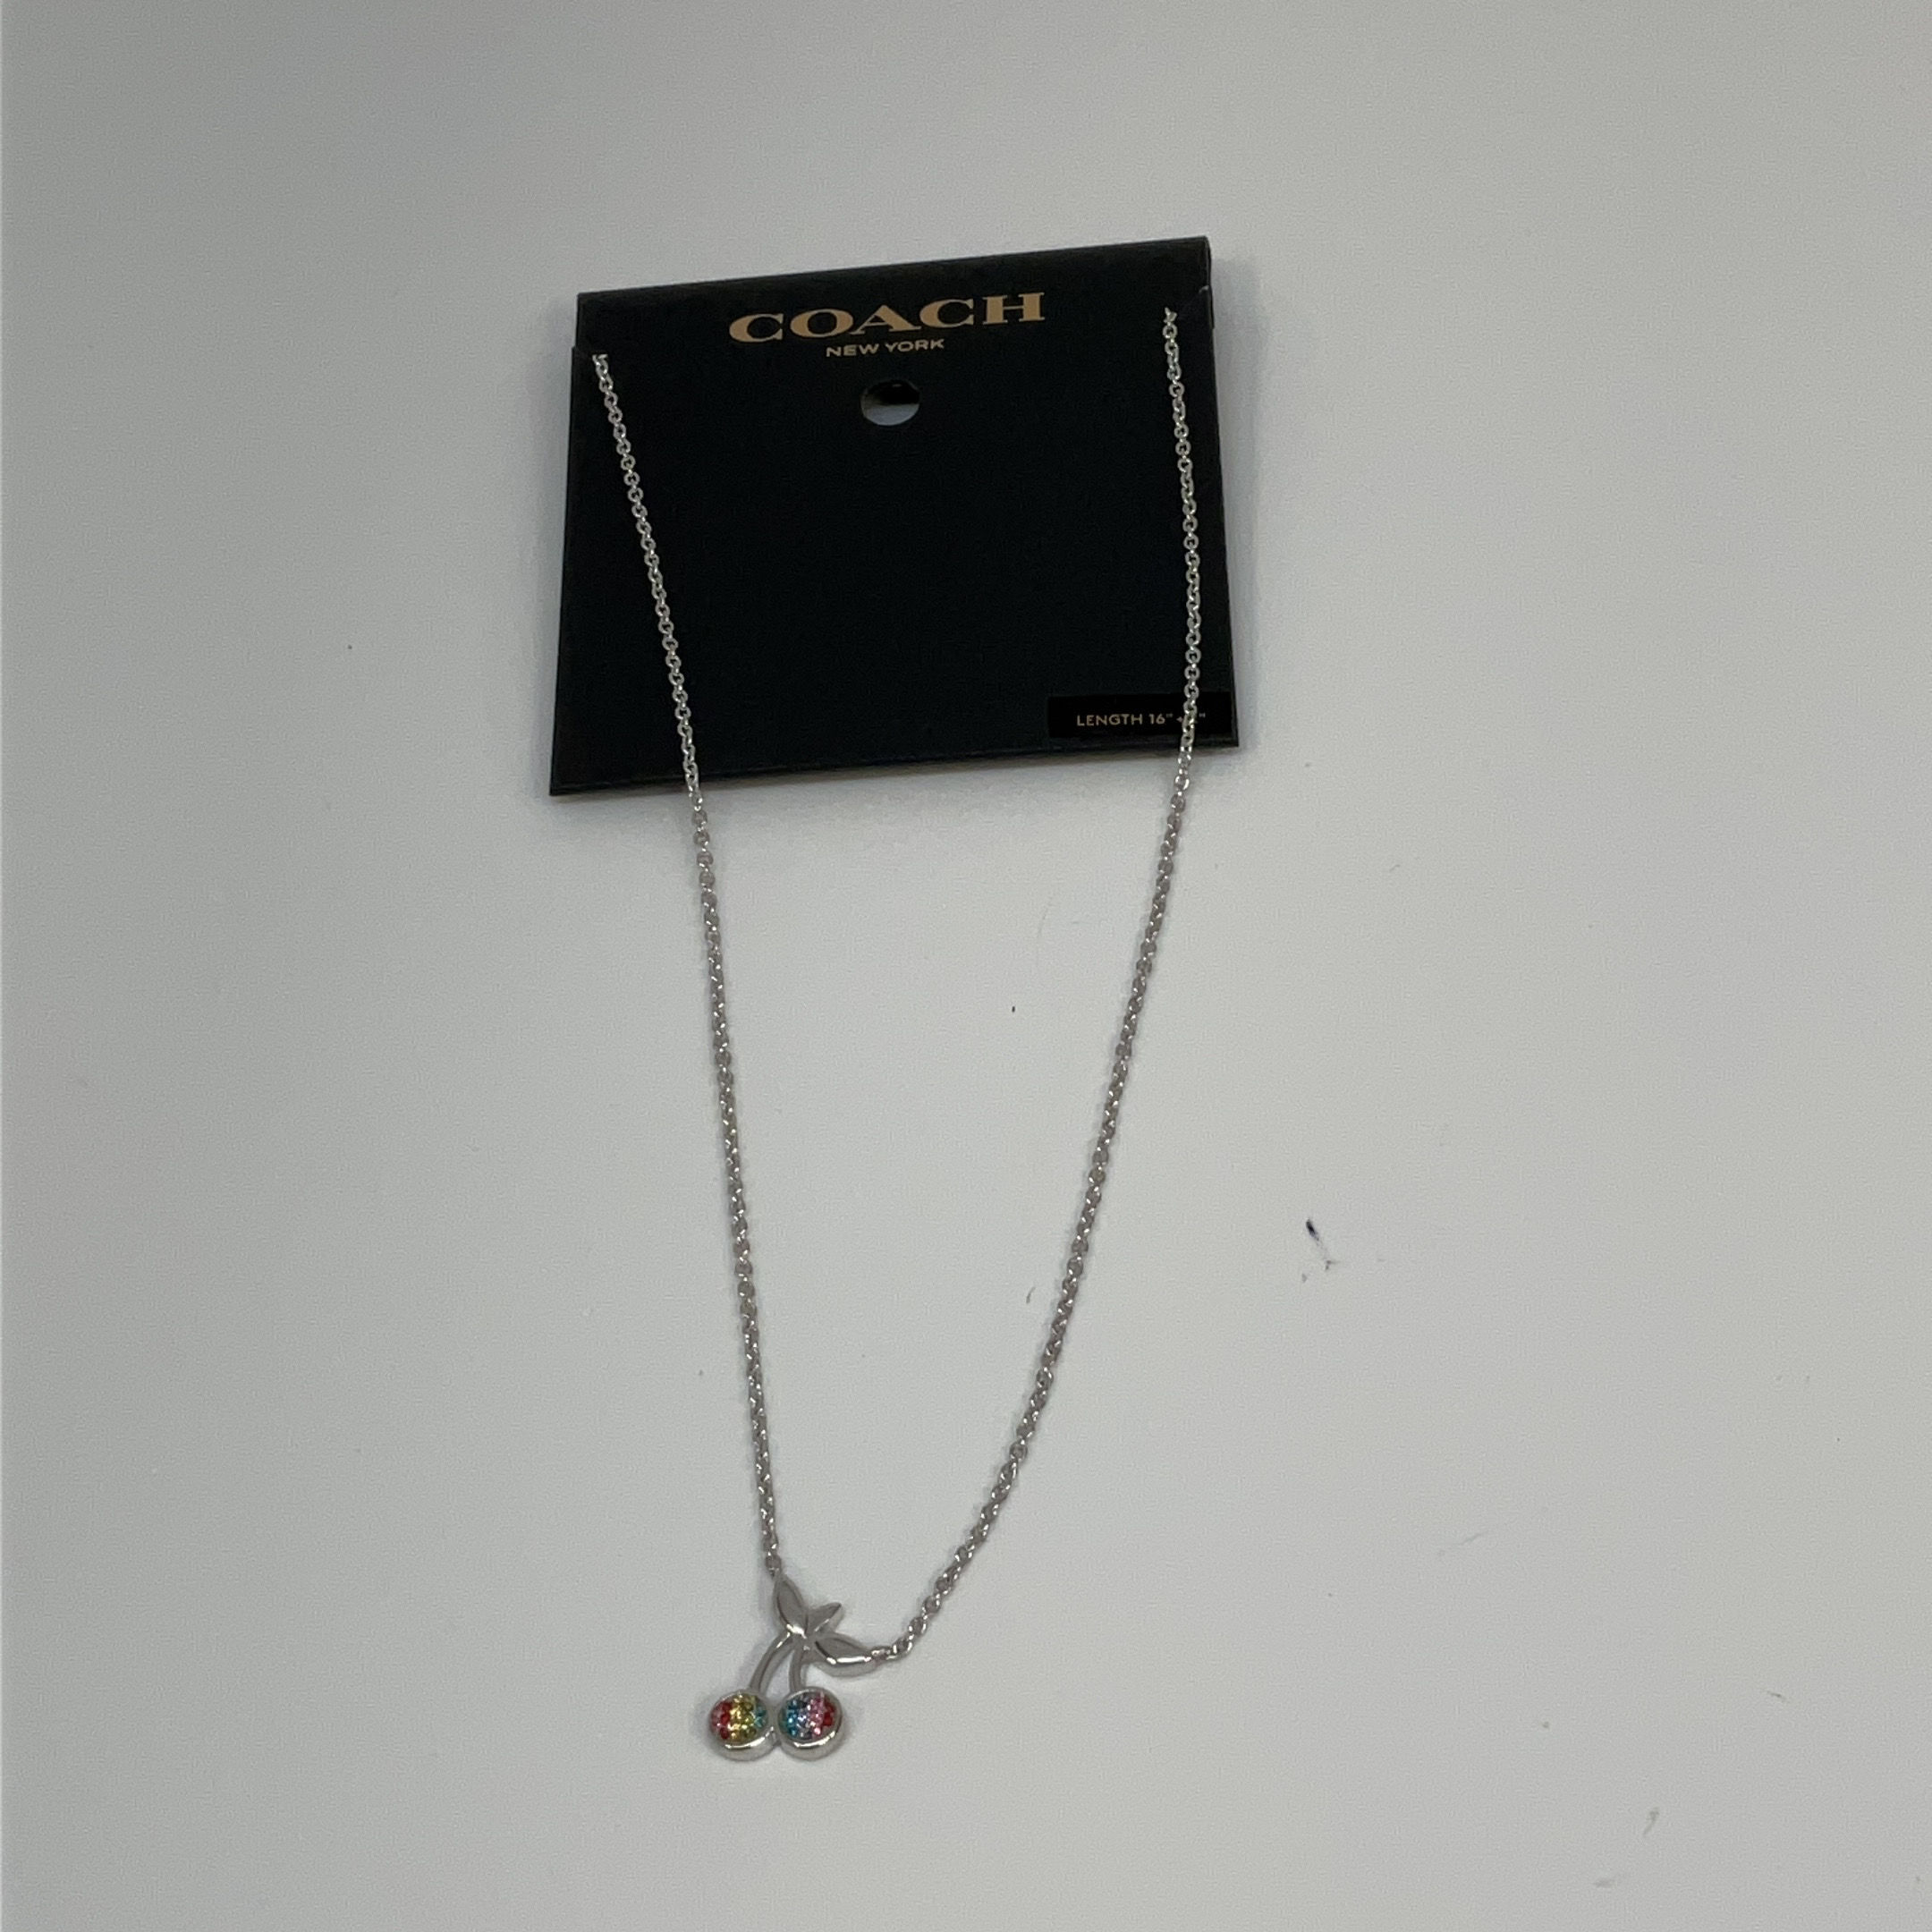 Gold and Silver Authentic Coach Necklace with Star and Heart Charms 16-18